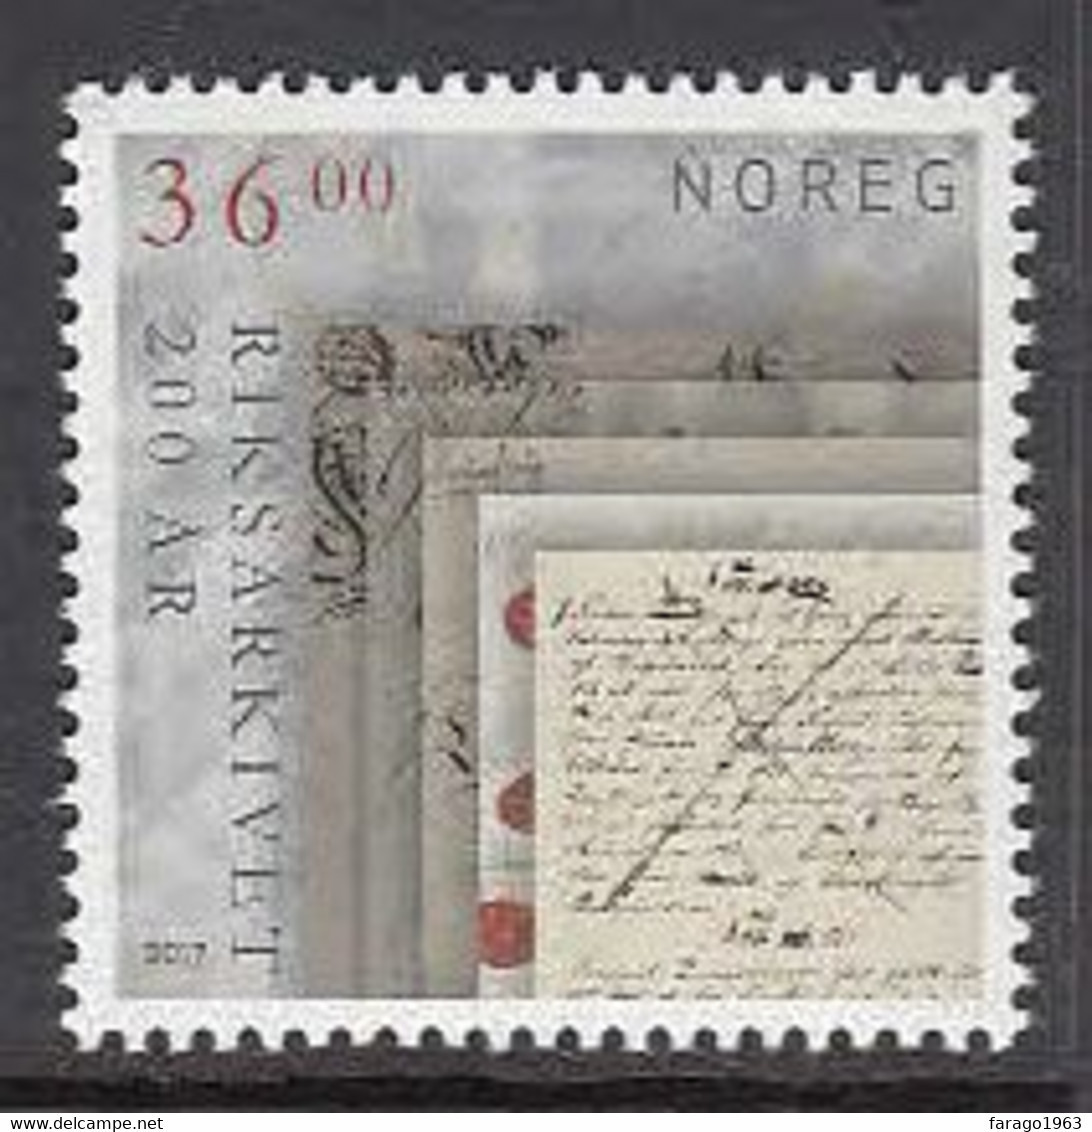 2017 Norway National Archives Complete Set Of 1 MNH @ BELOW FACE VALUE - Nuovi